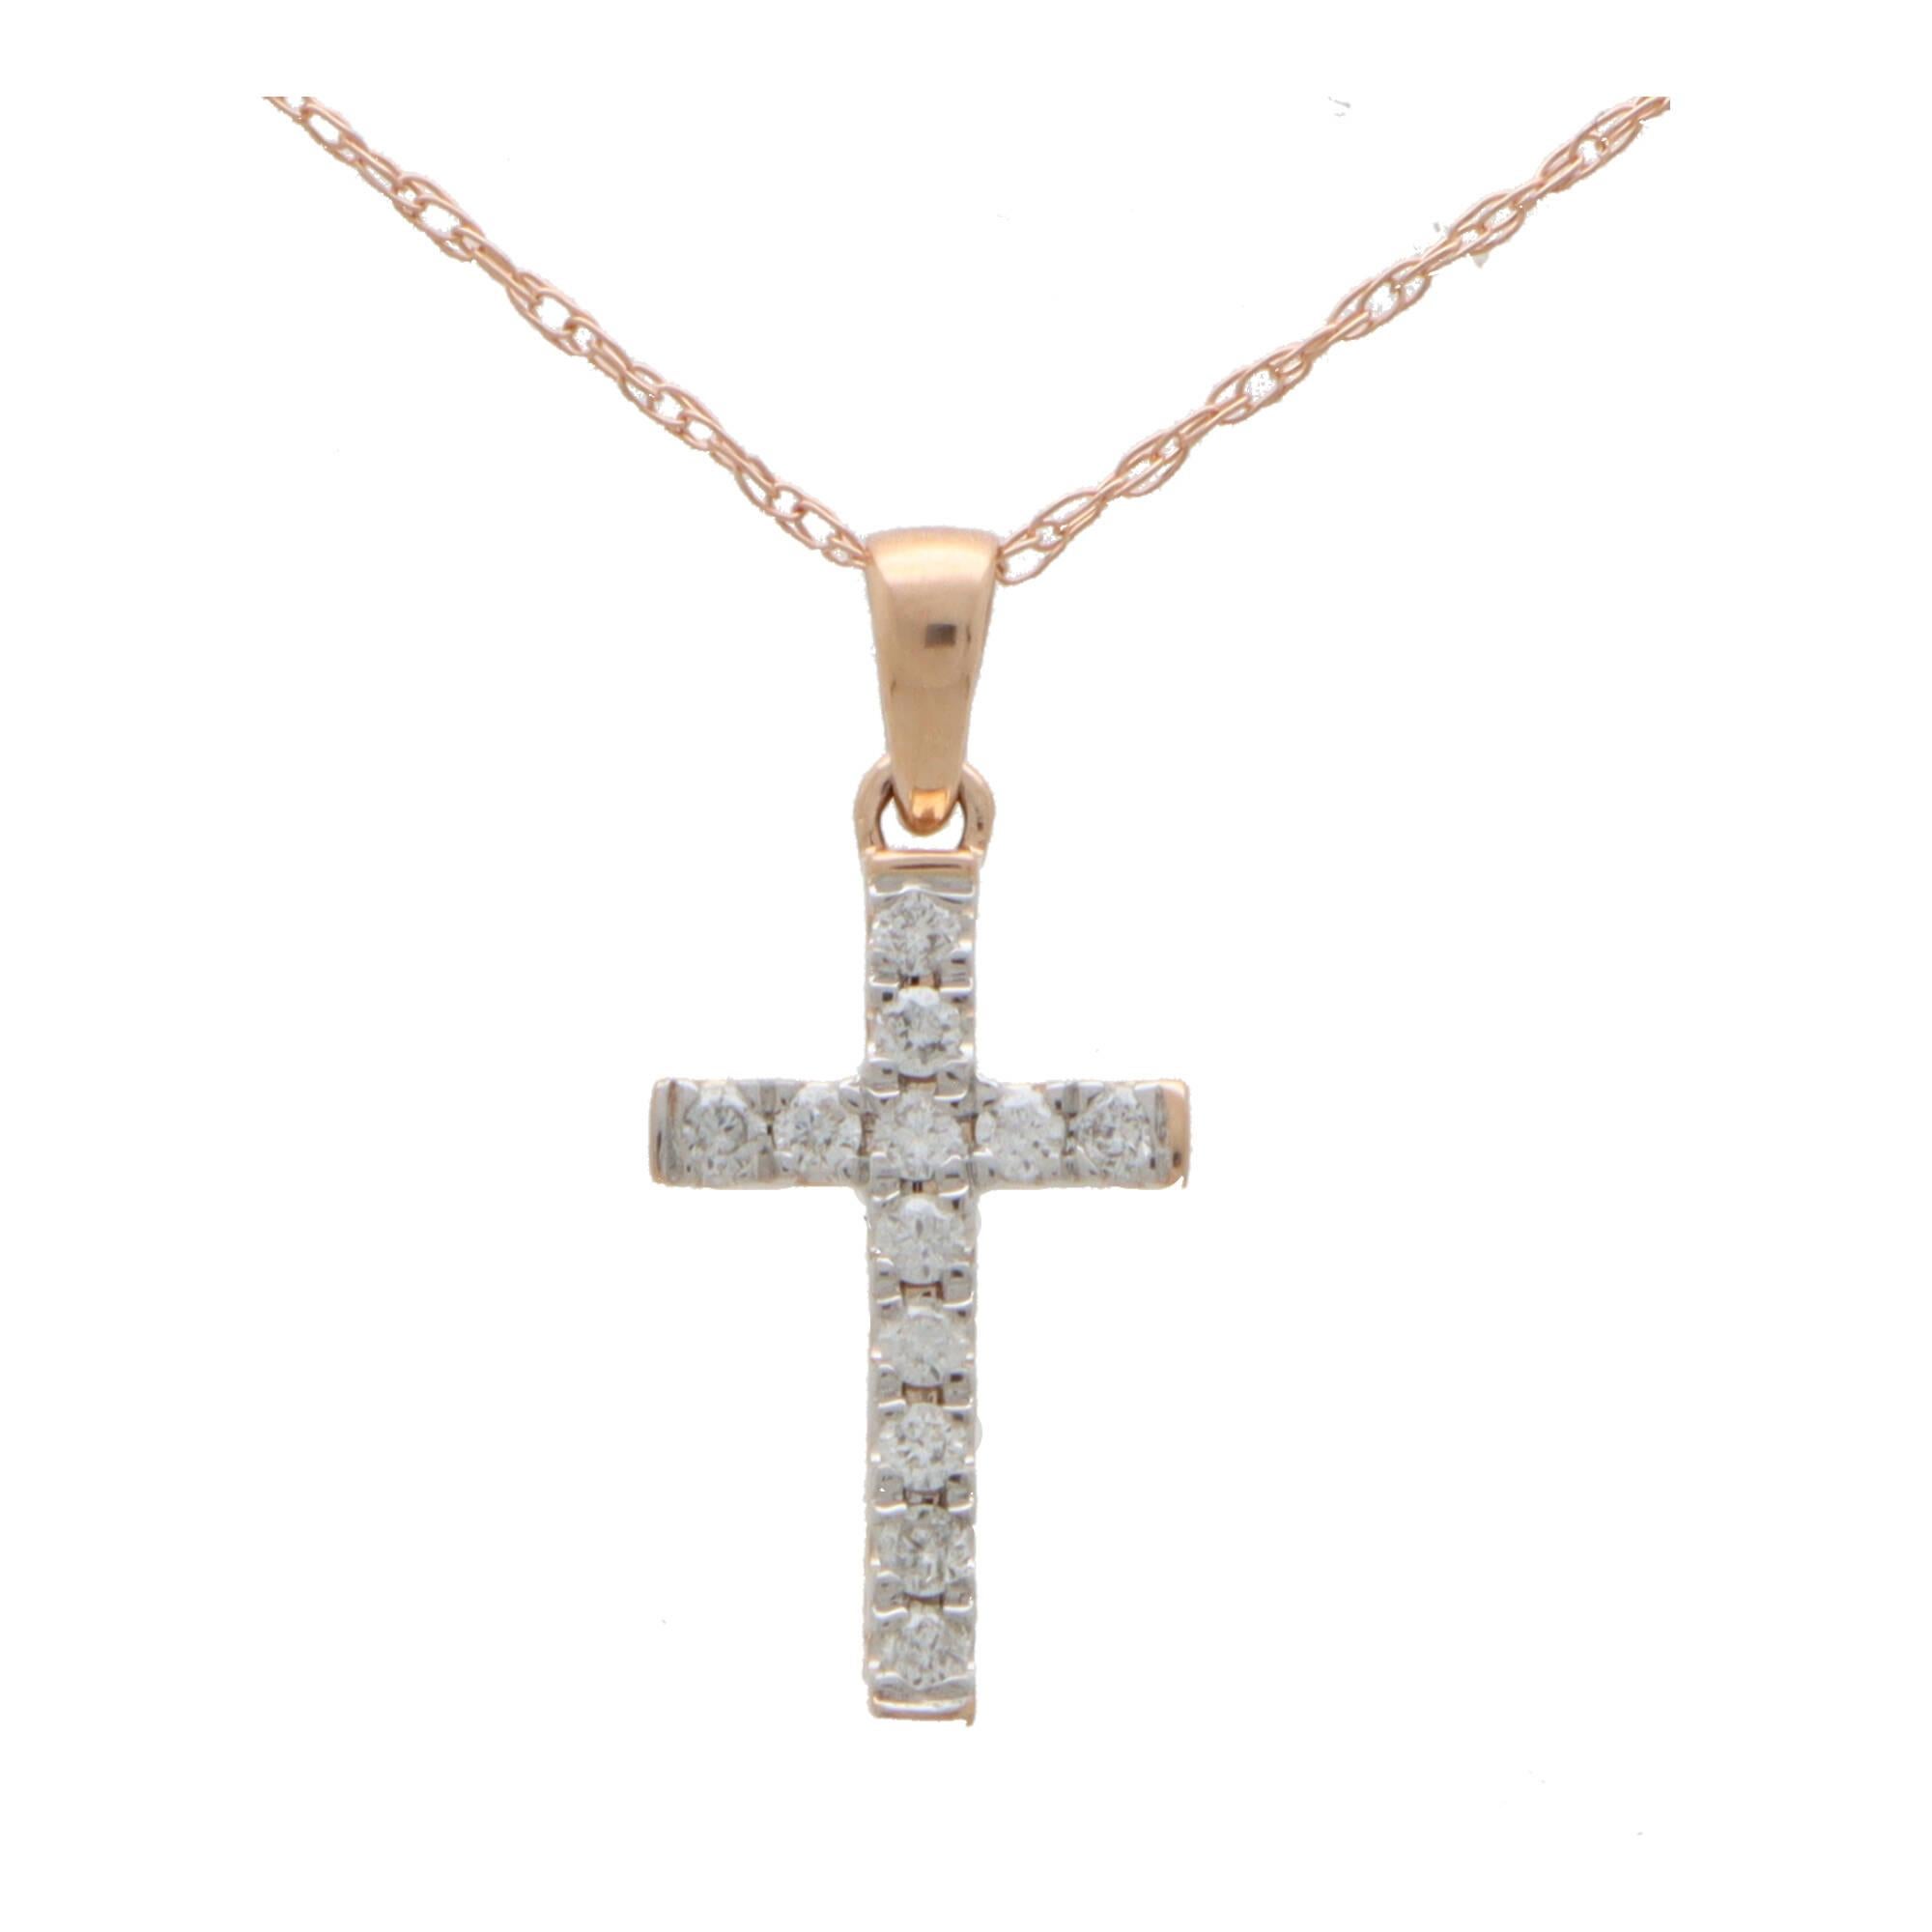 A dainty diamond cross pendant necklace set in 14k rose and white gold.

The pendant depicts a cross motif and is claw set with exactly 12 round brilliant cut diamonds. The cross hangs from a rose gold bail and hangs from a fine 18-inch rose gold